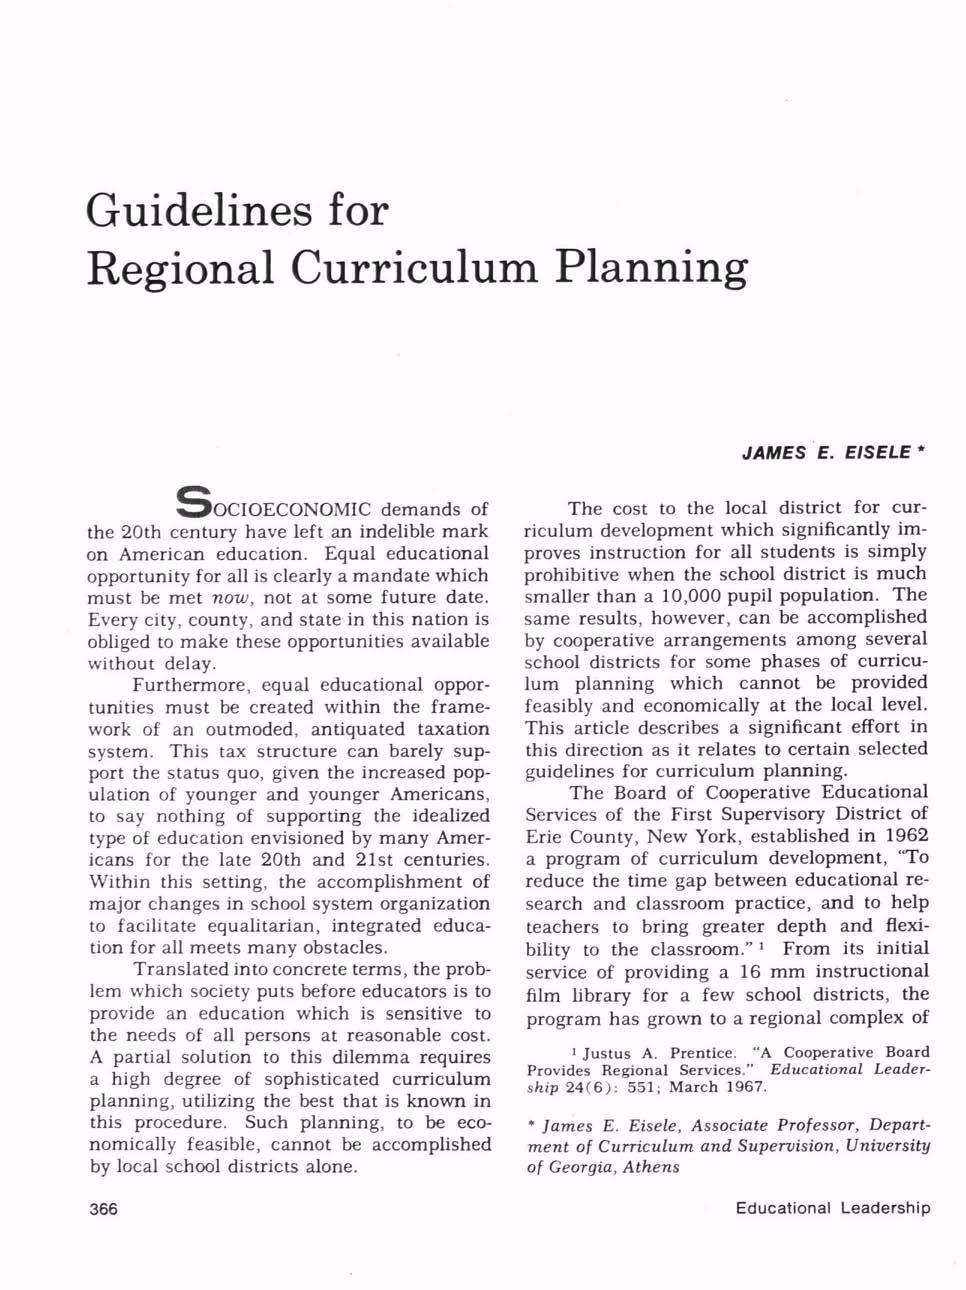 Guidelines for Regional Curriculum Planning OOCIOECONOMIC demands of the 20th century have left an indelible mark on American education.